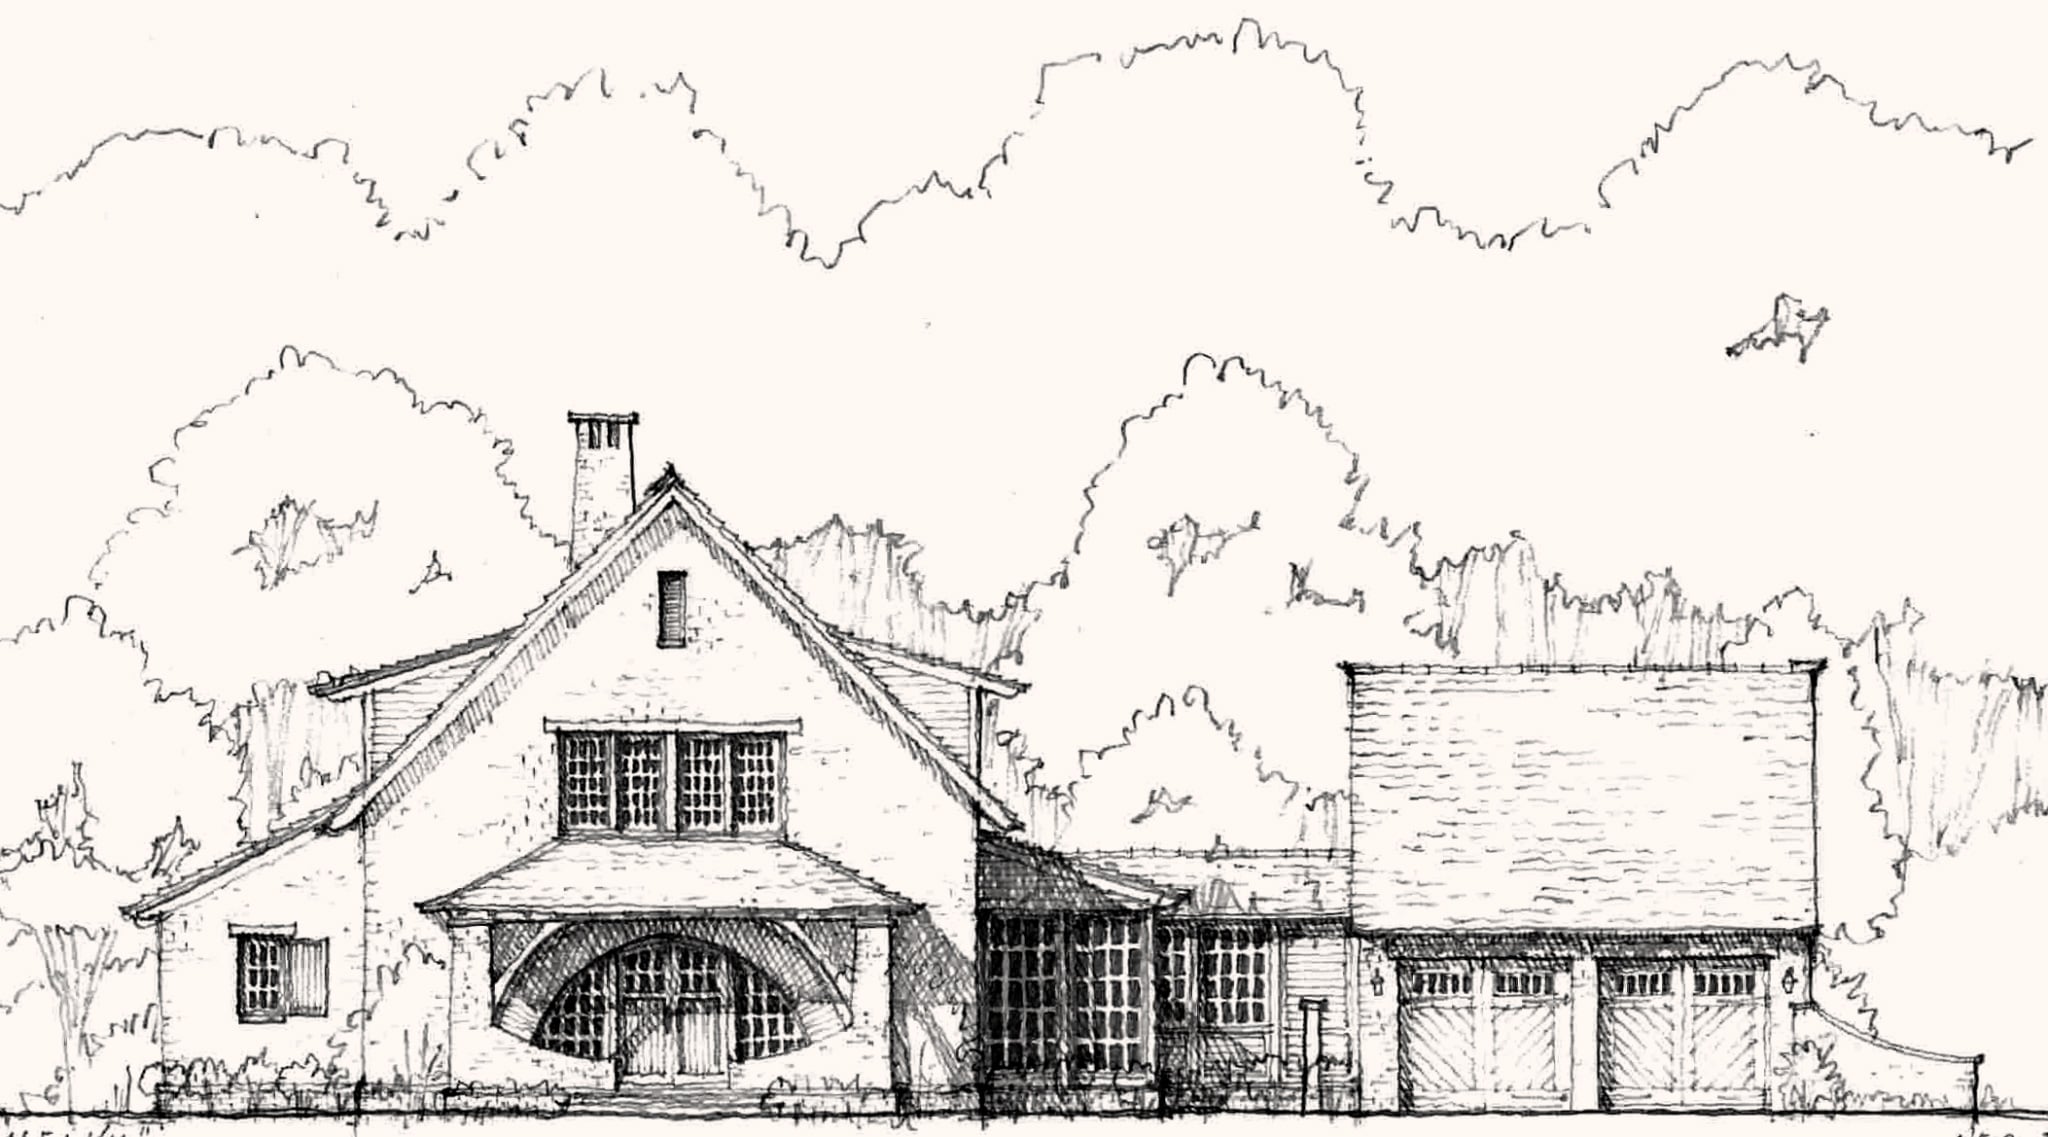 Architect’s concept drawing of a Shoal Creek custom home design